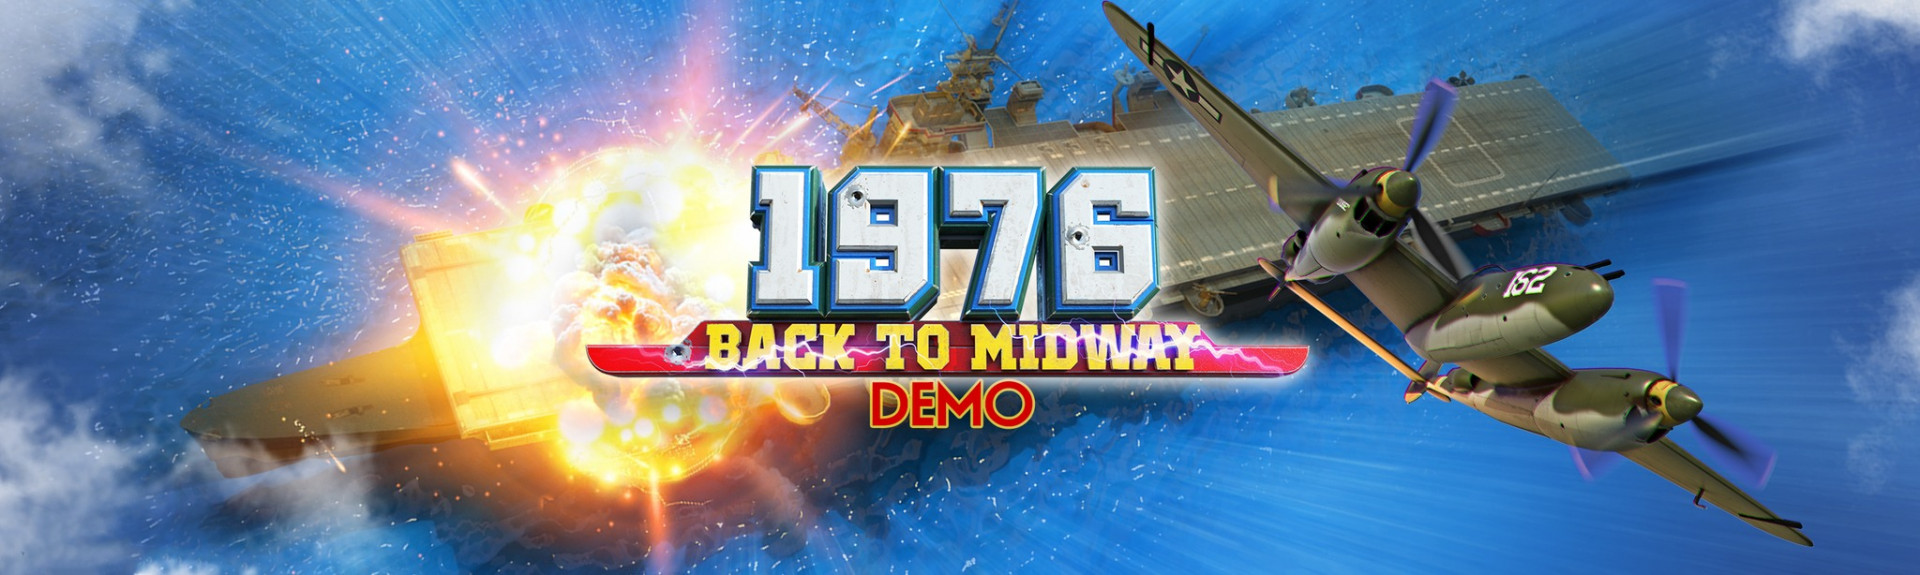 1976 - Back to midway DEMO